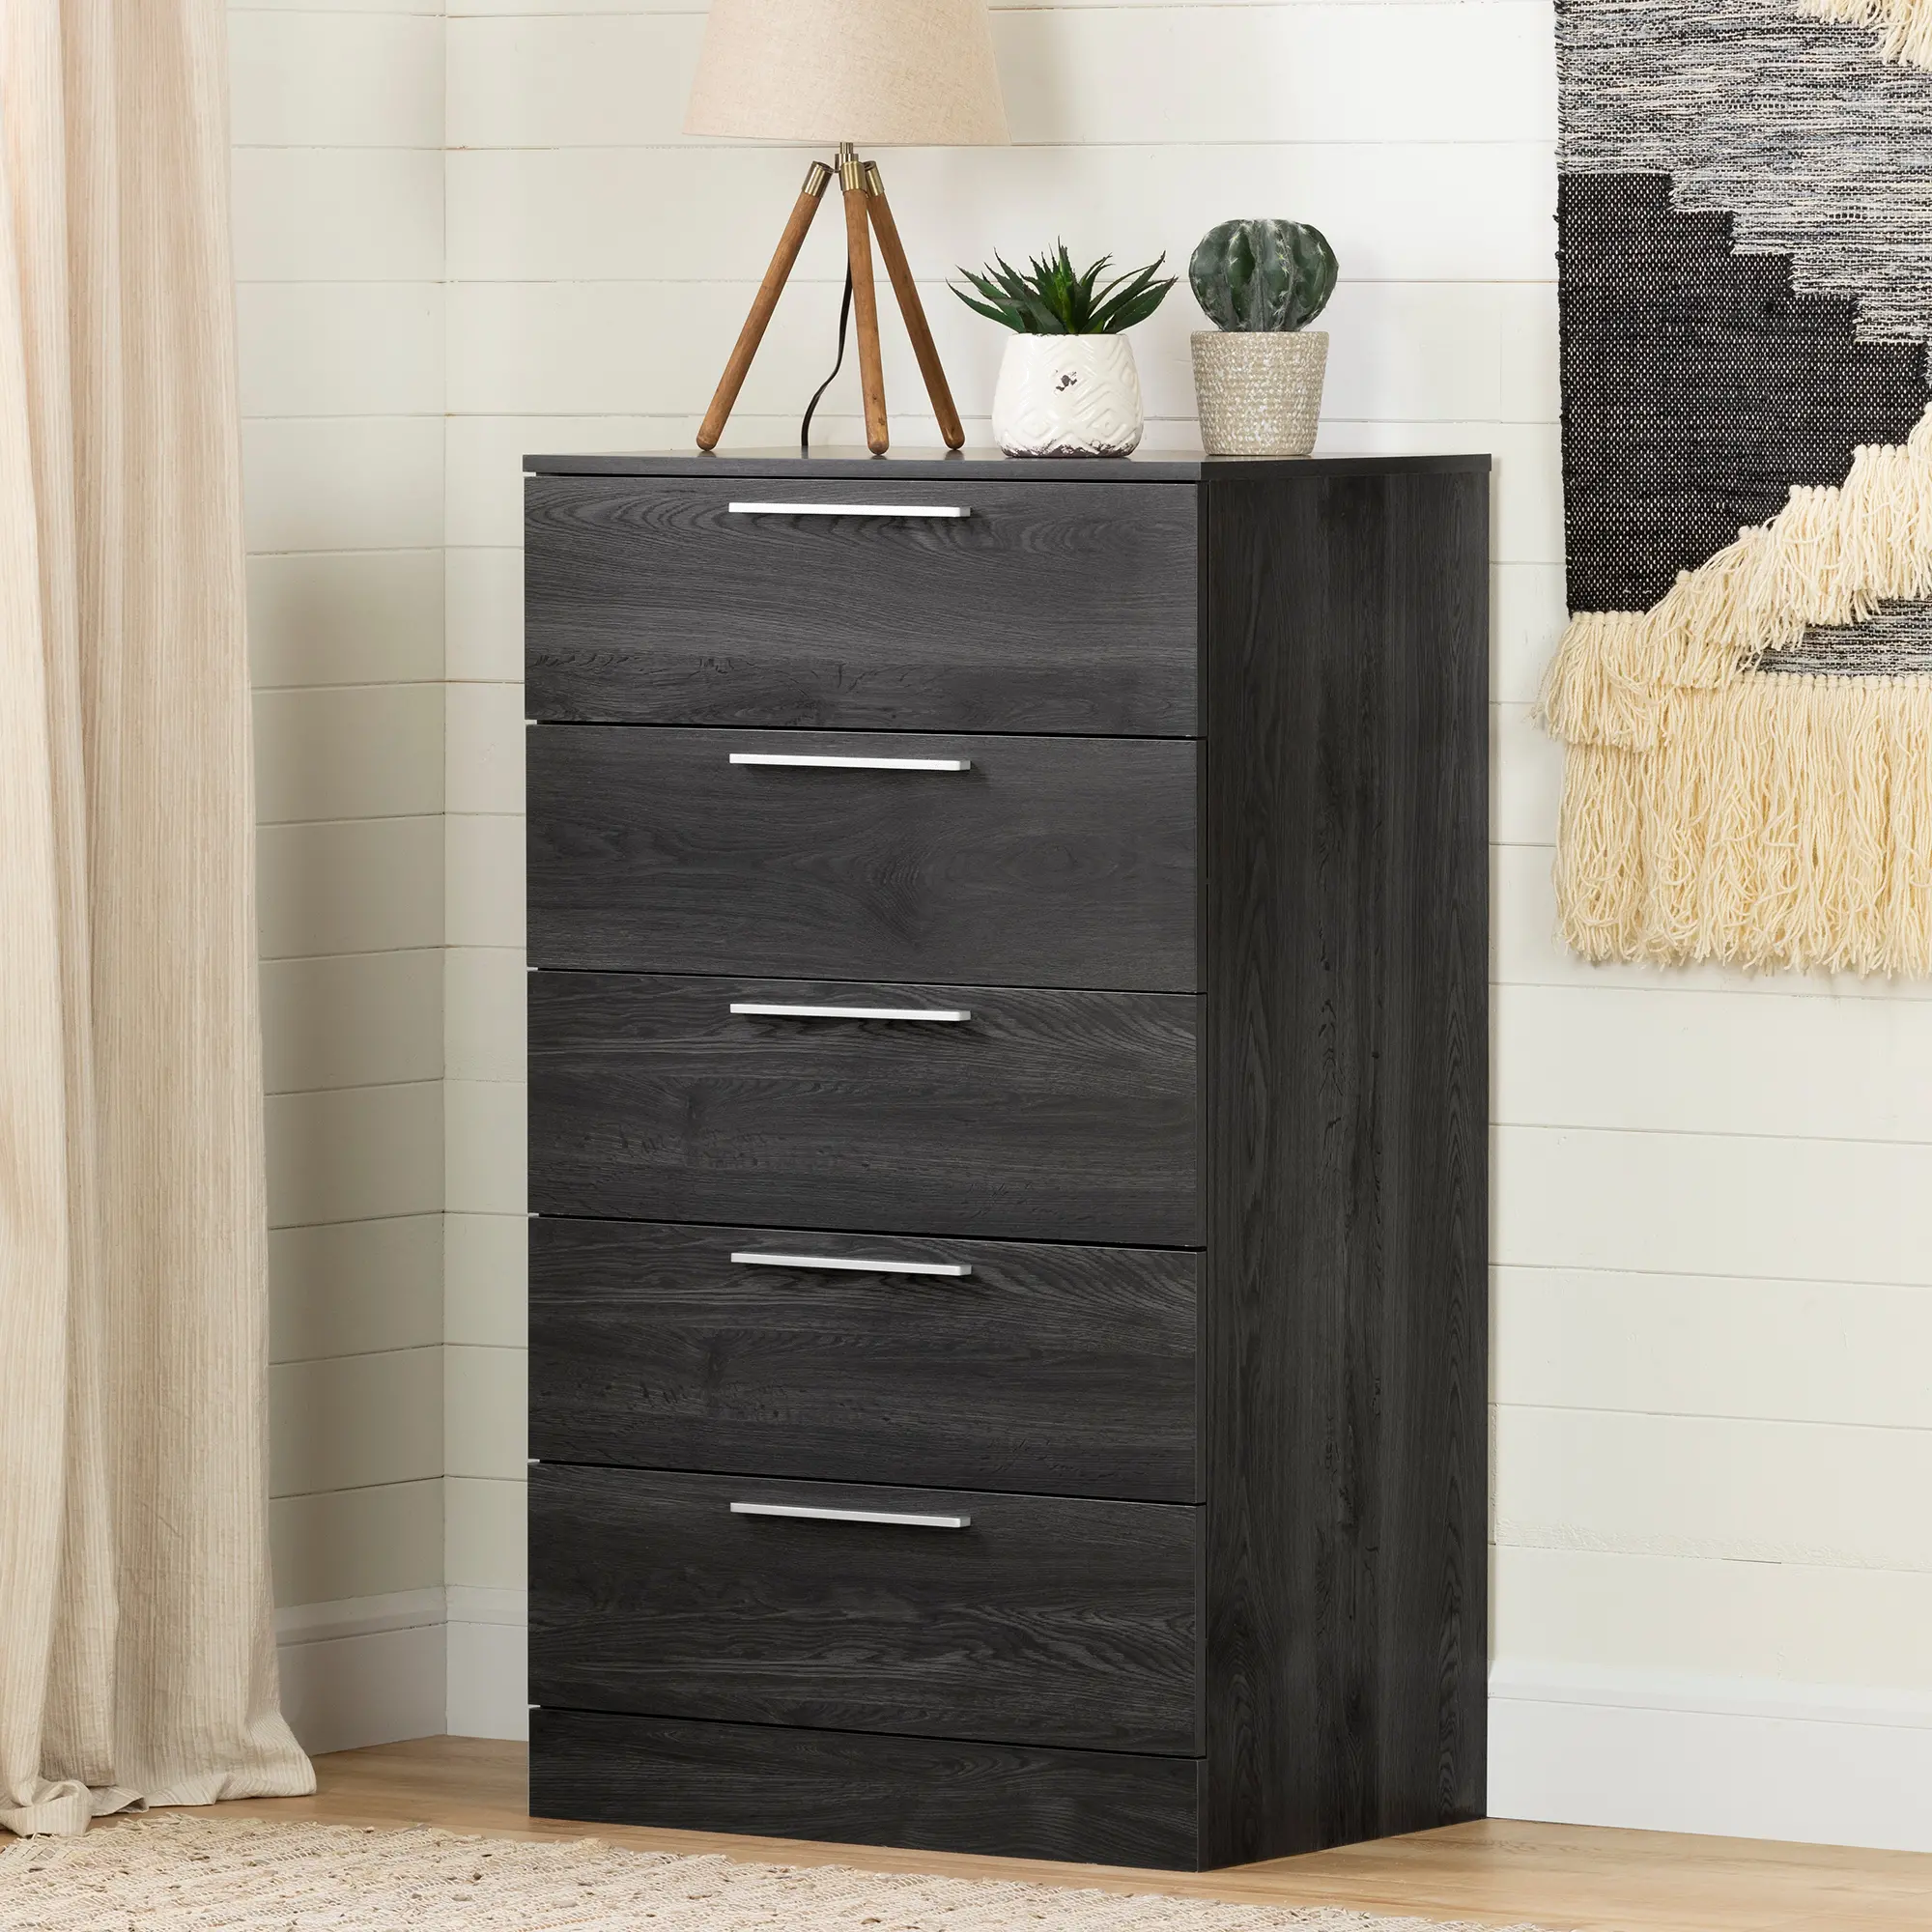 Photos - Dresser / Chests of Drawers South Shore Gray Oak Chest of Drawers - South Shore 12232